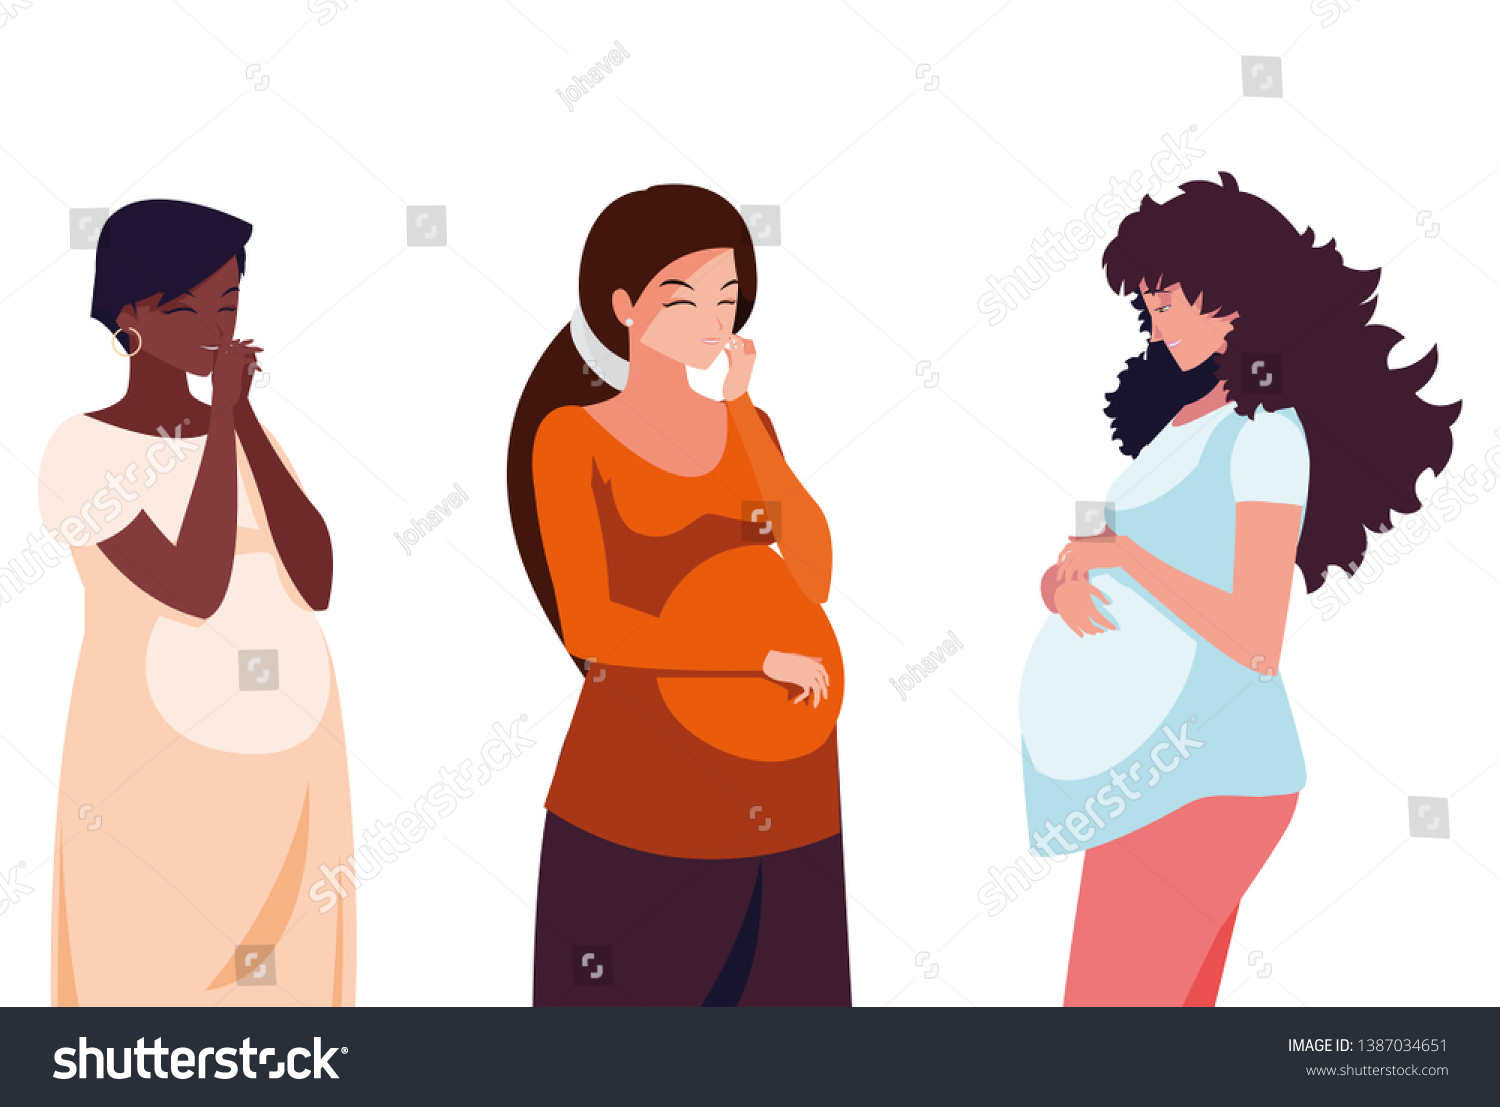 Interracial Group Of Pregnancy Women Characters Royalty Free Stock